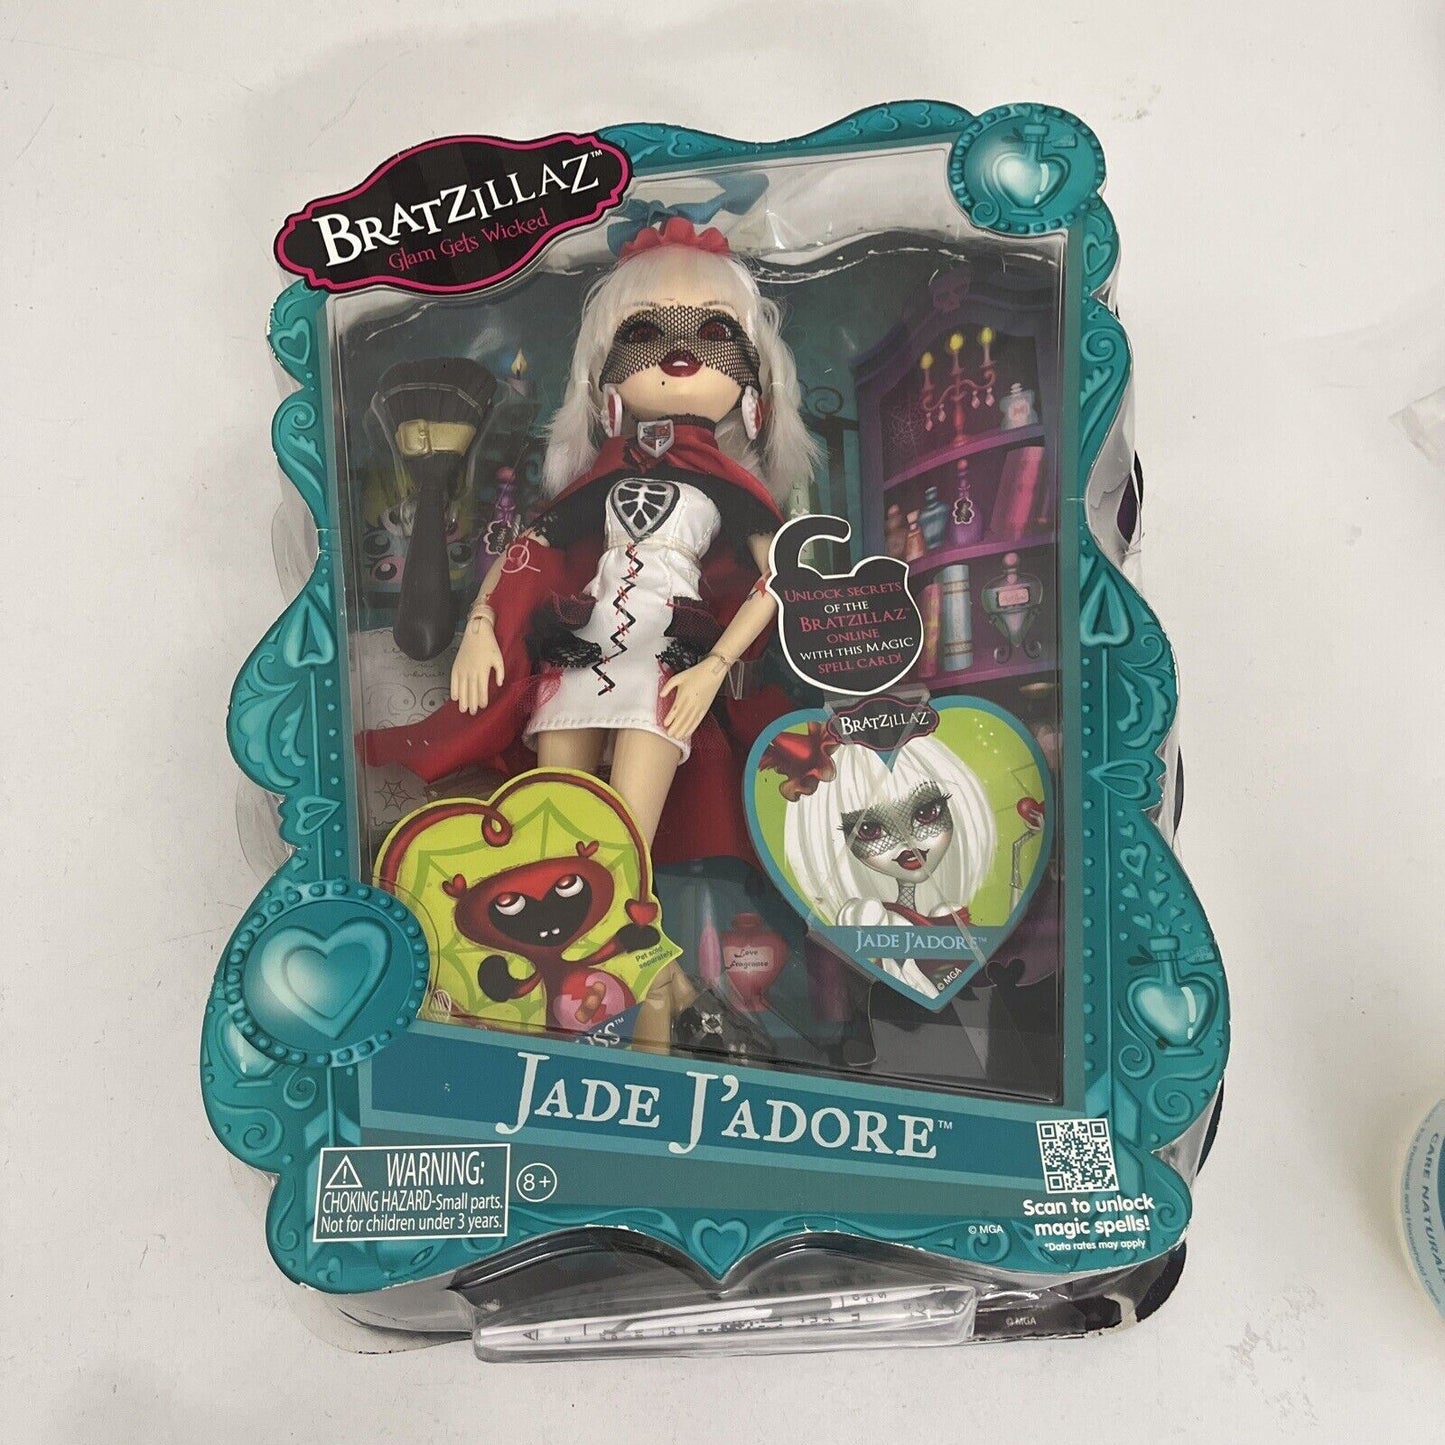 NataliezWorld: Glam gets wicked with Bratzillaz's Jade J'Adore Review